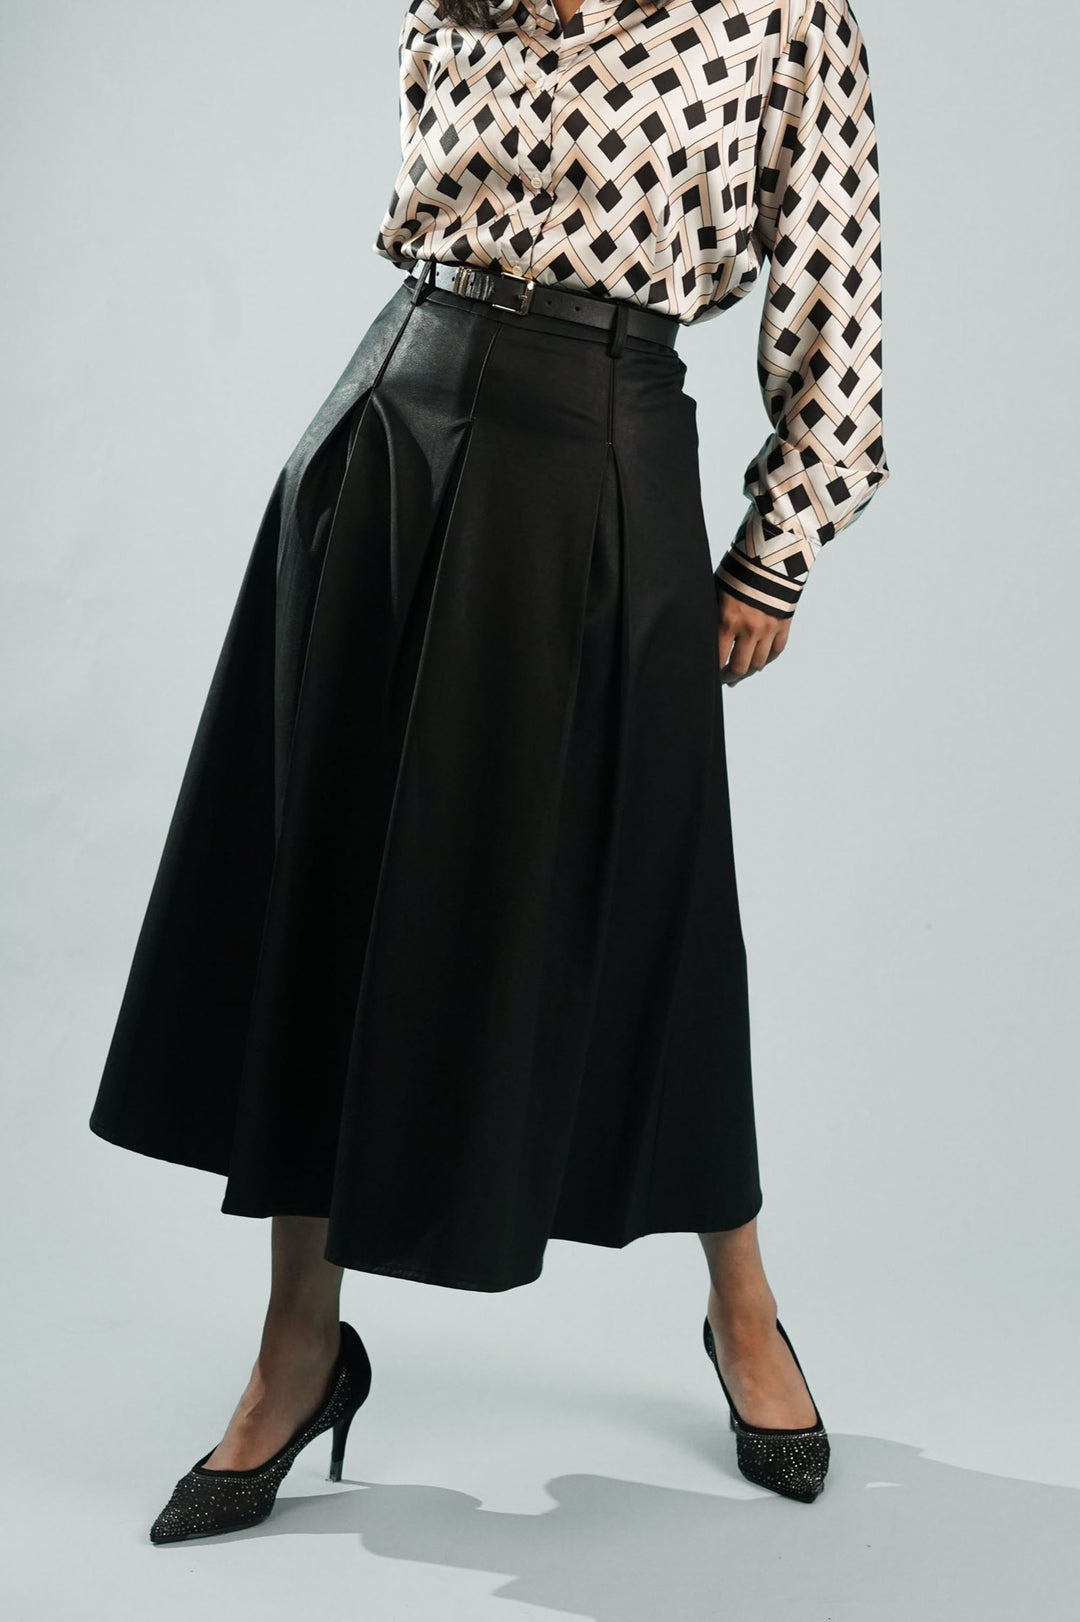 Black faux leather skirt with belt for office